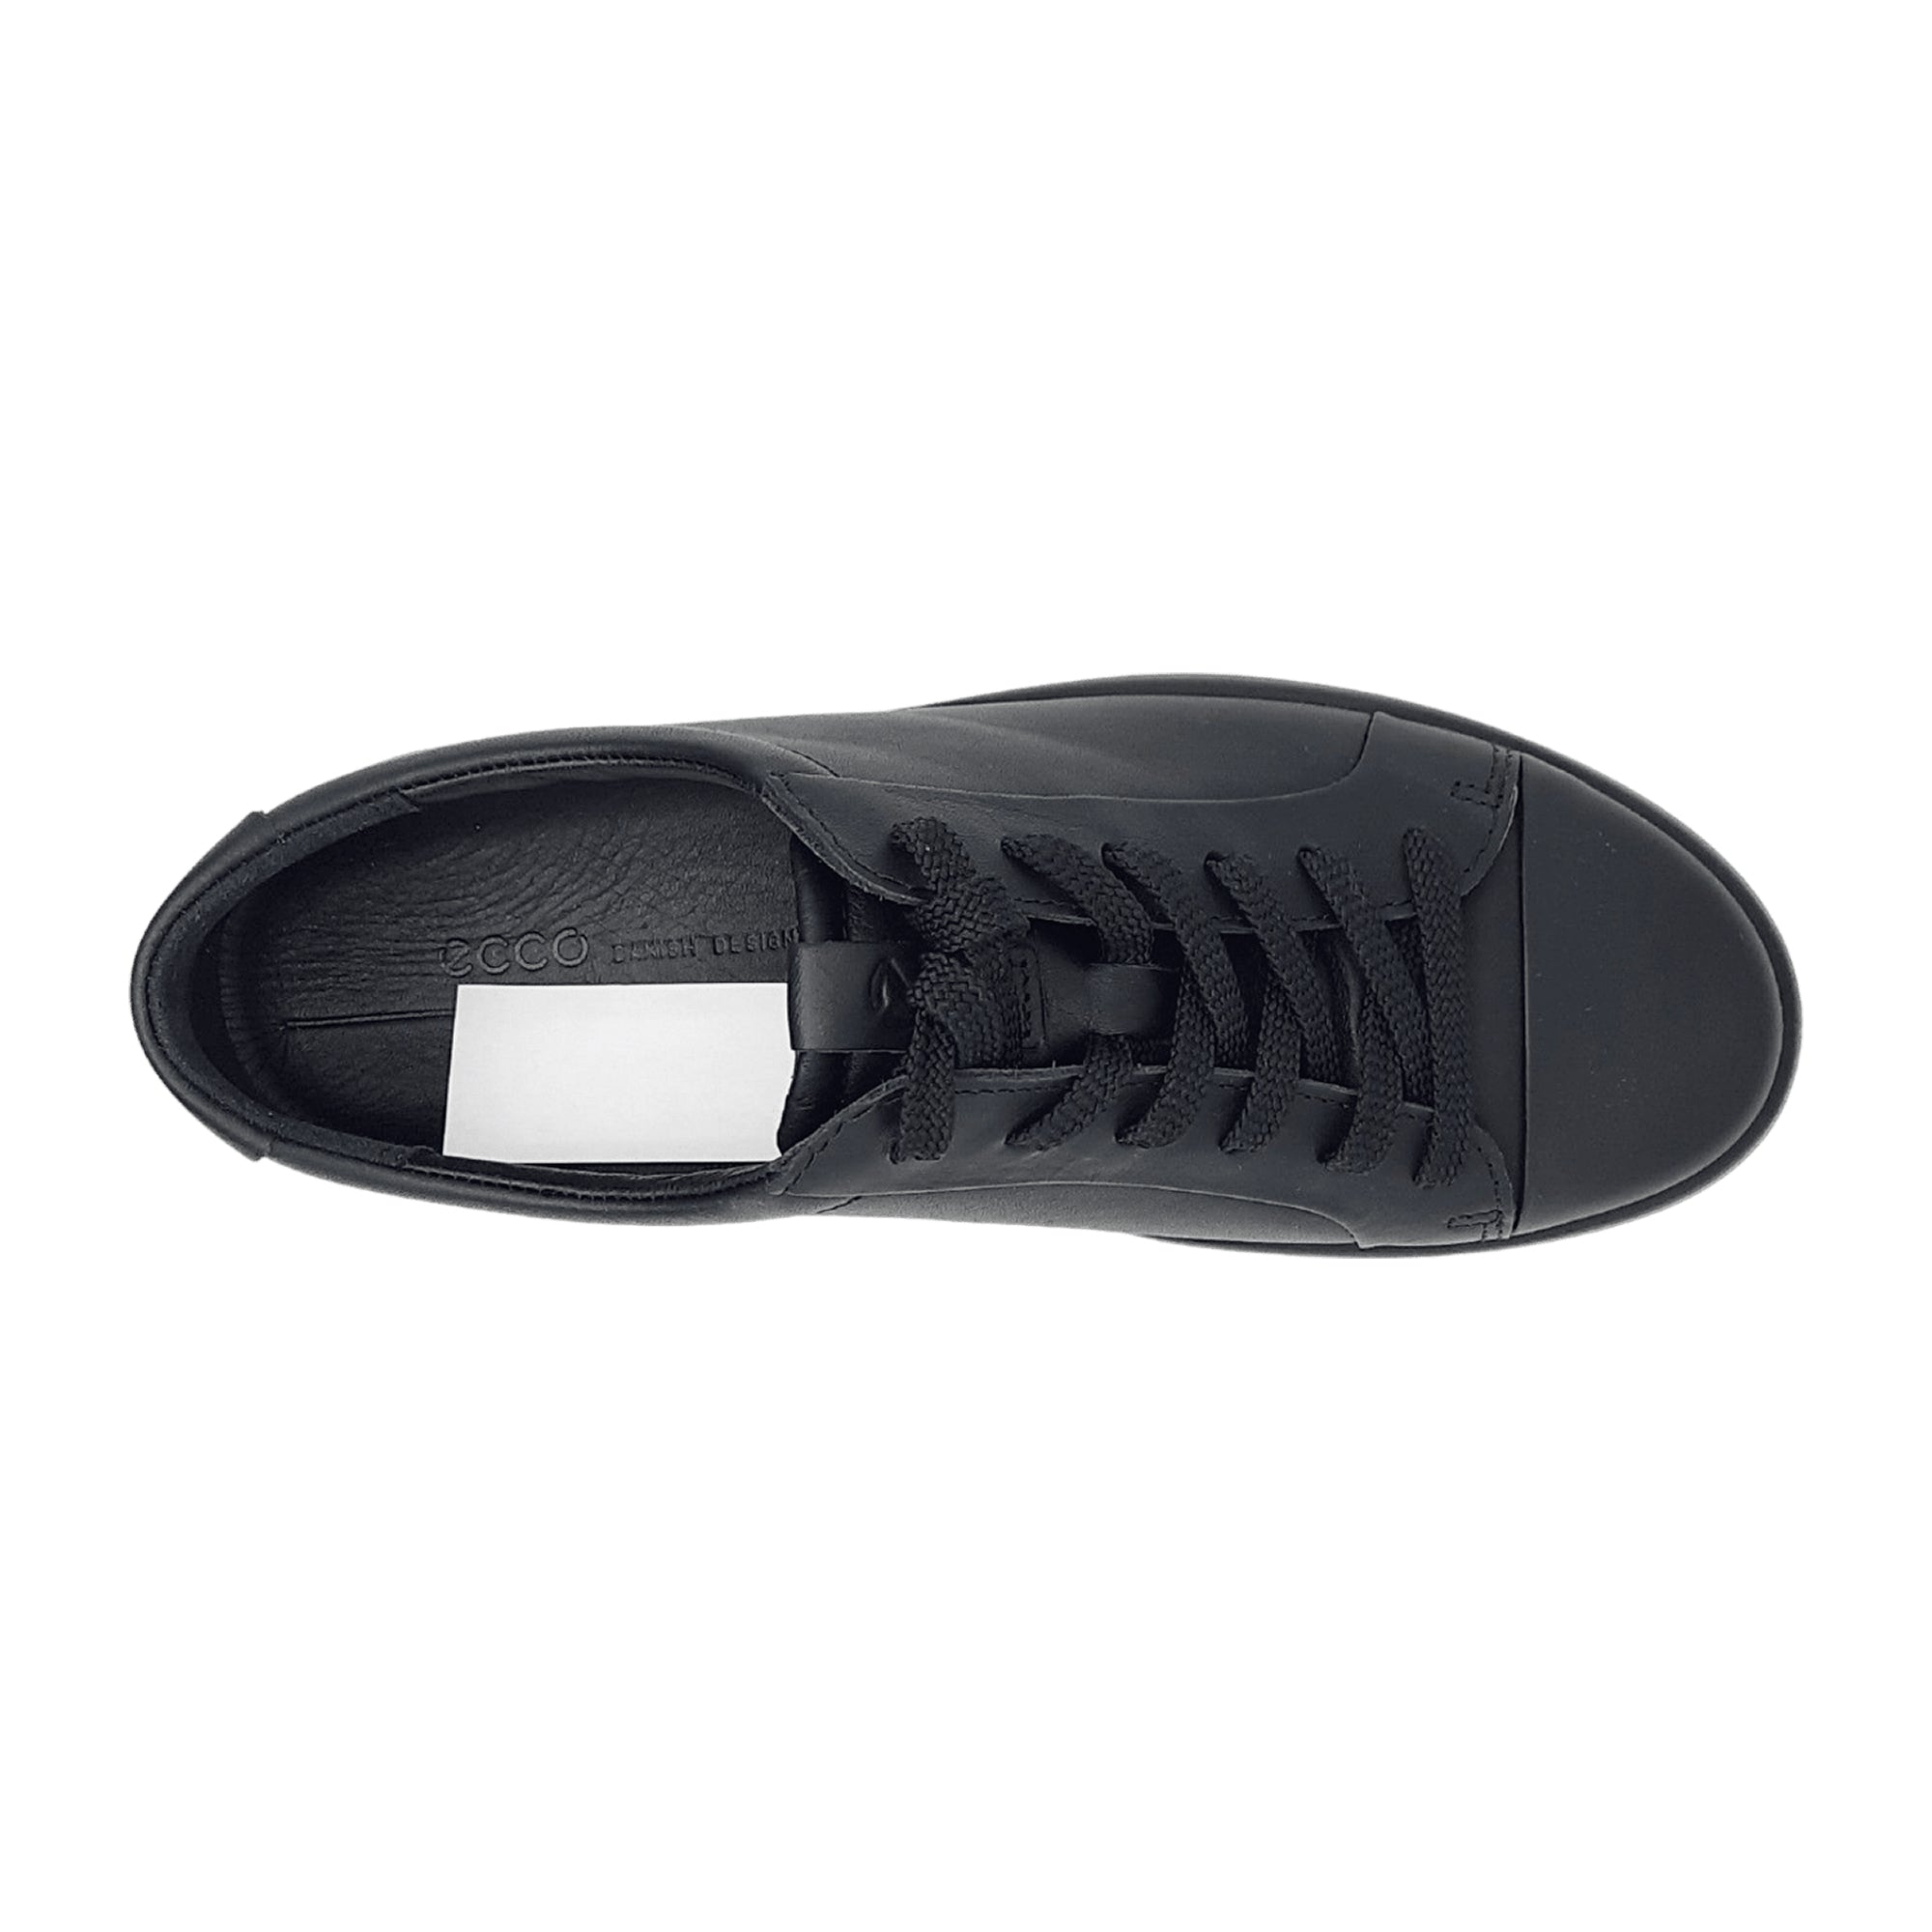 Ecco SOFT 7 Women's Black Leather Sneakers - Comfortable & Durable